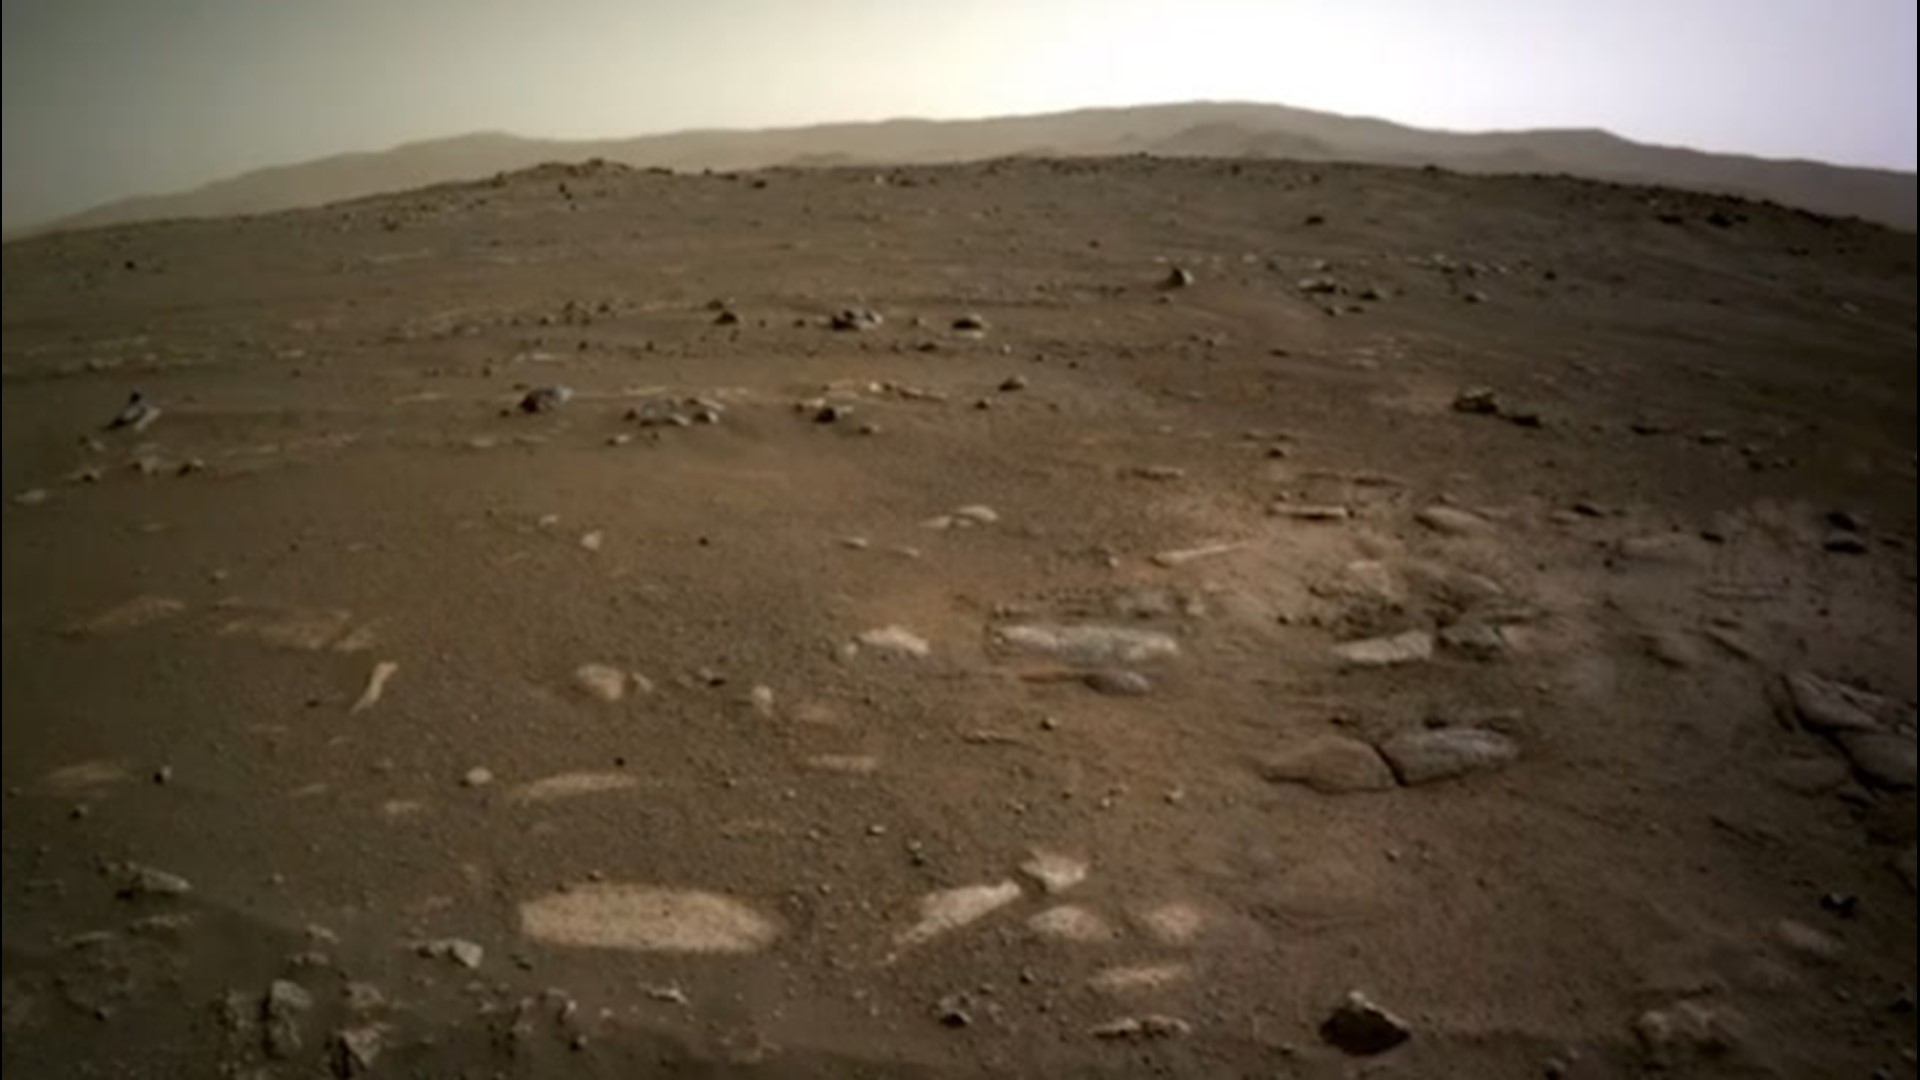 NASA's Perseverance rover is sending back photos of the surface of Mars, providing a first authentic look at the Red Planet's vistas.